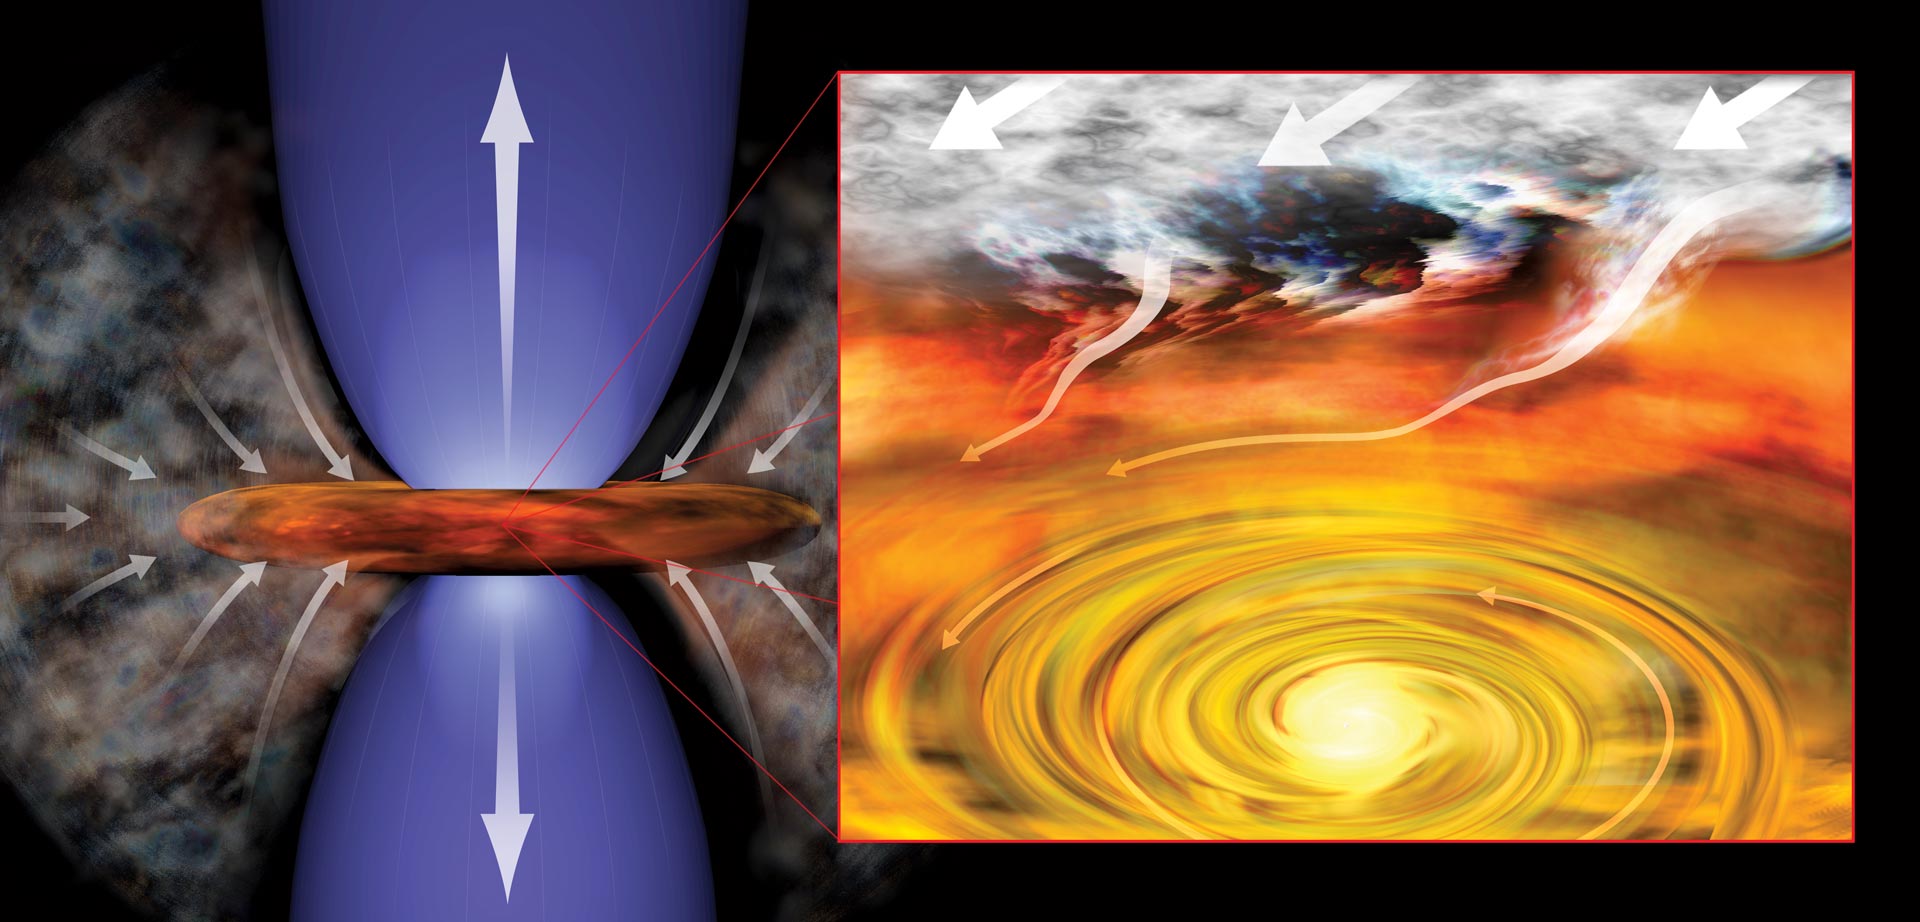 <p>Infant stars, like those recently identified near the supermassive black hole at the center of our galaxy, are surrounded by a swirling disk of dust and gas. In this artist's conception of infant solar system, the young star pulls material from its surroundings into rotating disk (right) and generates outflowing jets of material (left).<br />
Credit: Bill Saxton (NRAO/AUI/NSF)</p>
